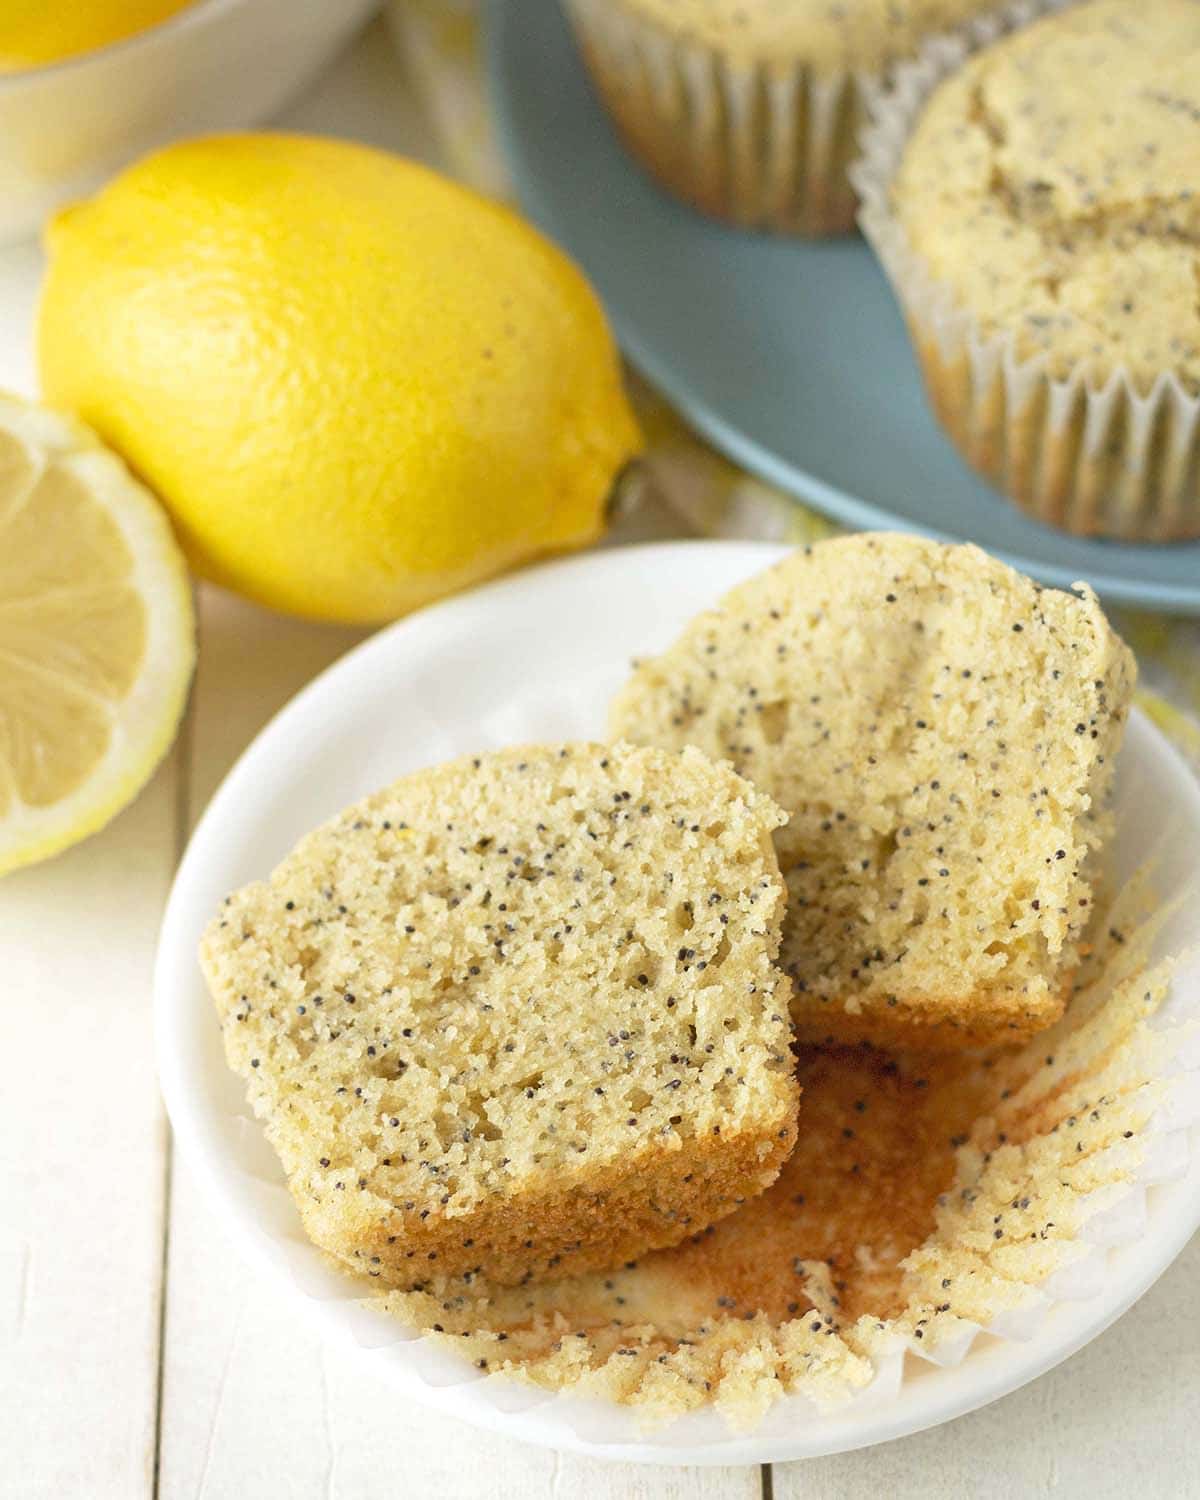 A split lemon poppy seed muffin on a plate showing the inner fluffy texture.